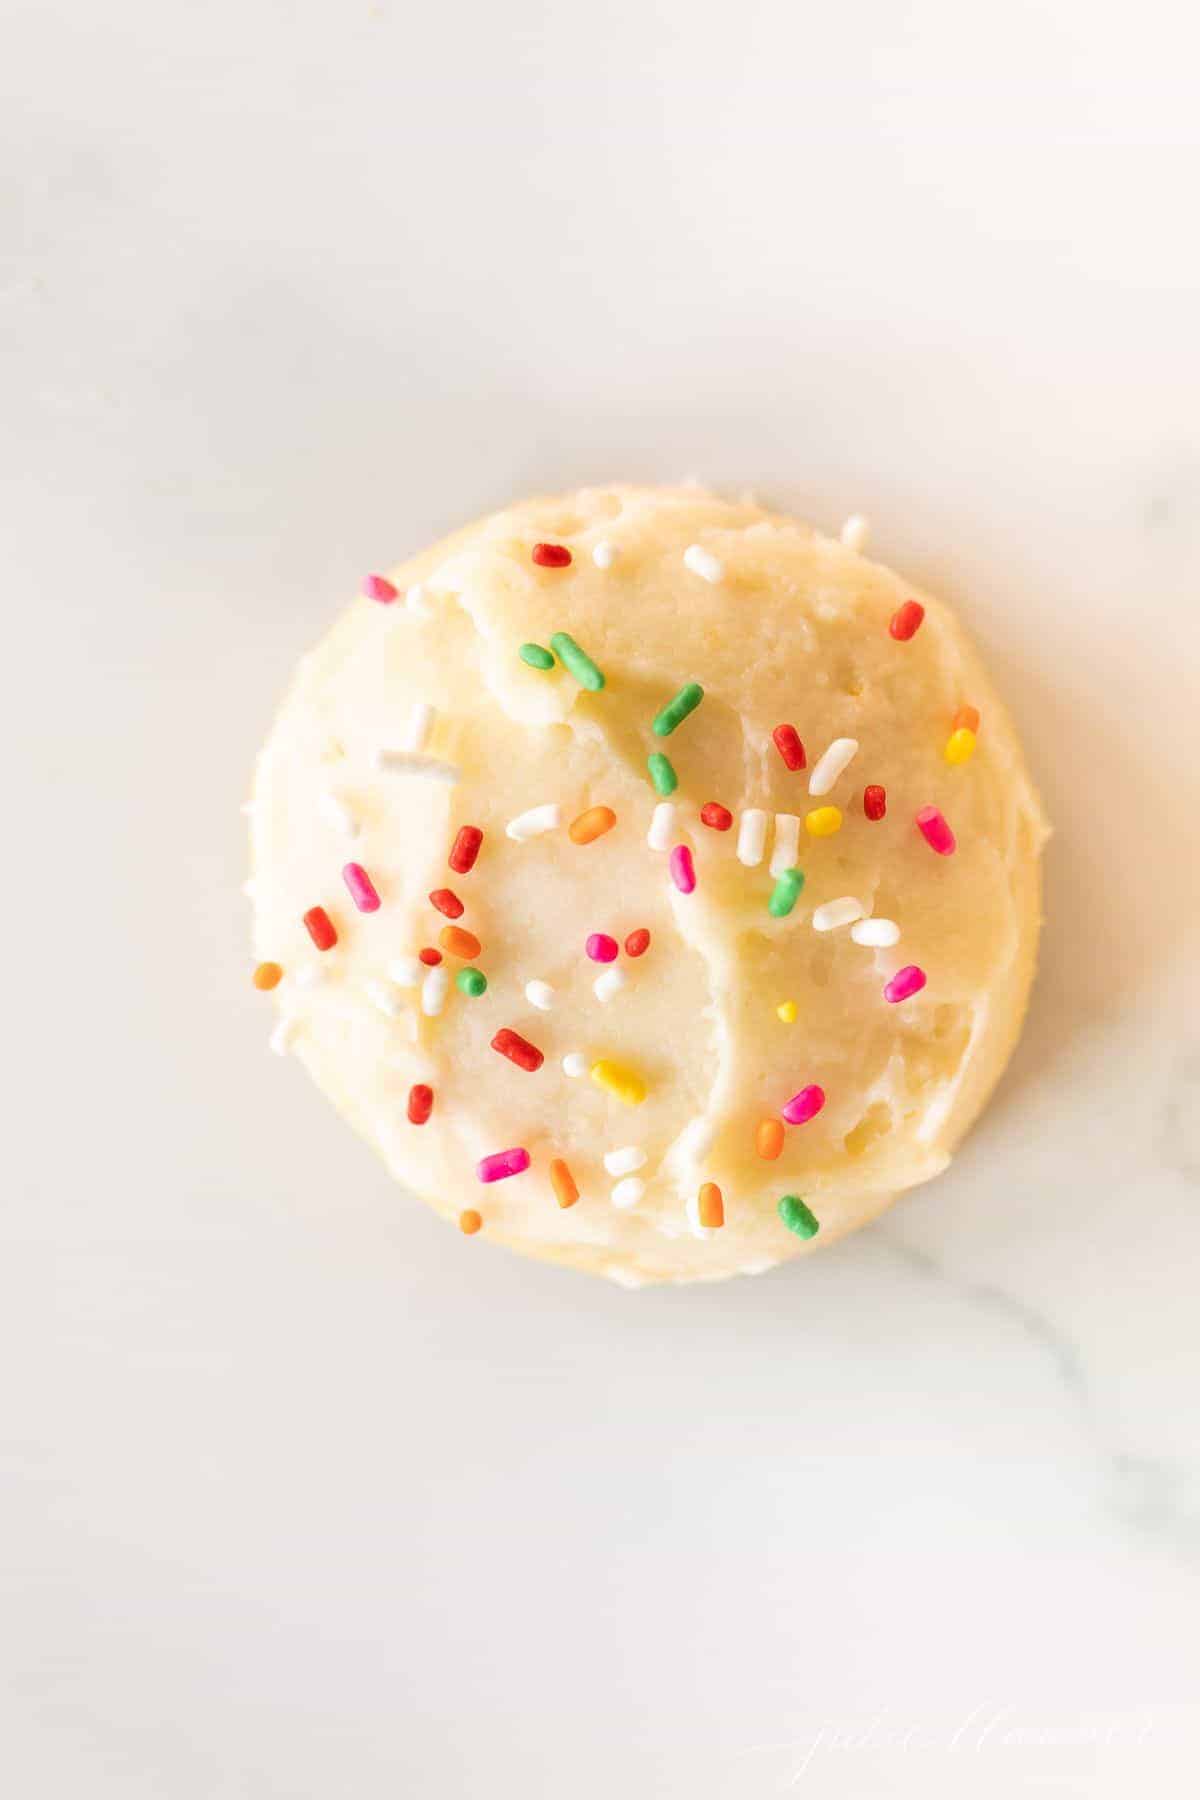 A single Amish sugar cookie frosted with sprinkles on a marble surface.